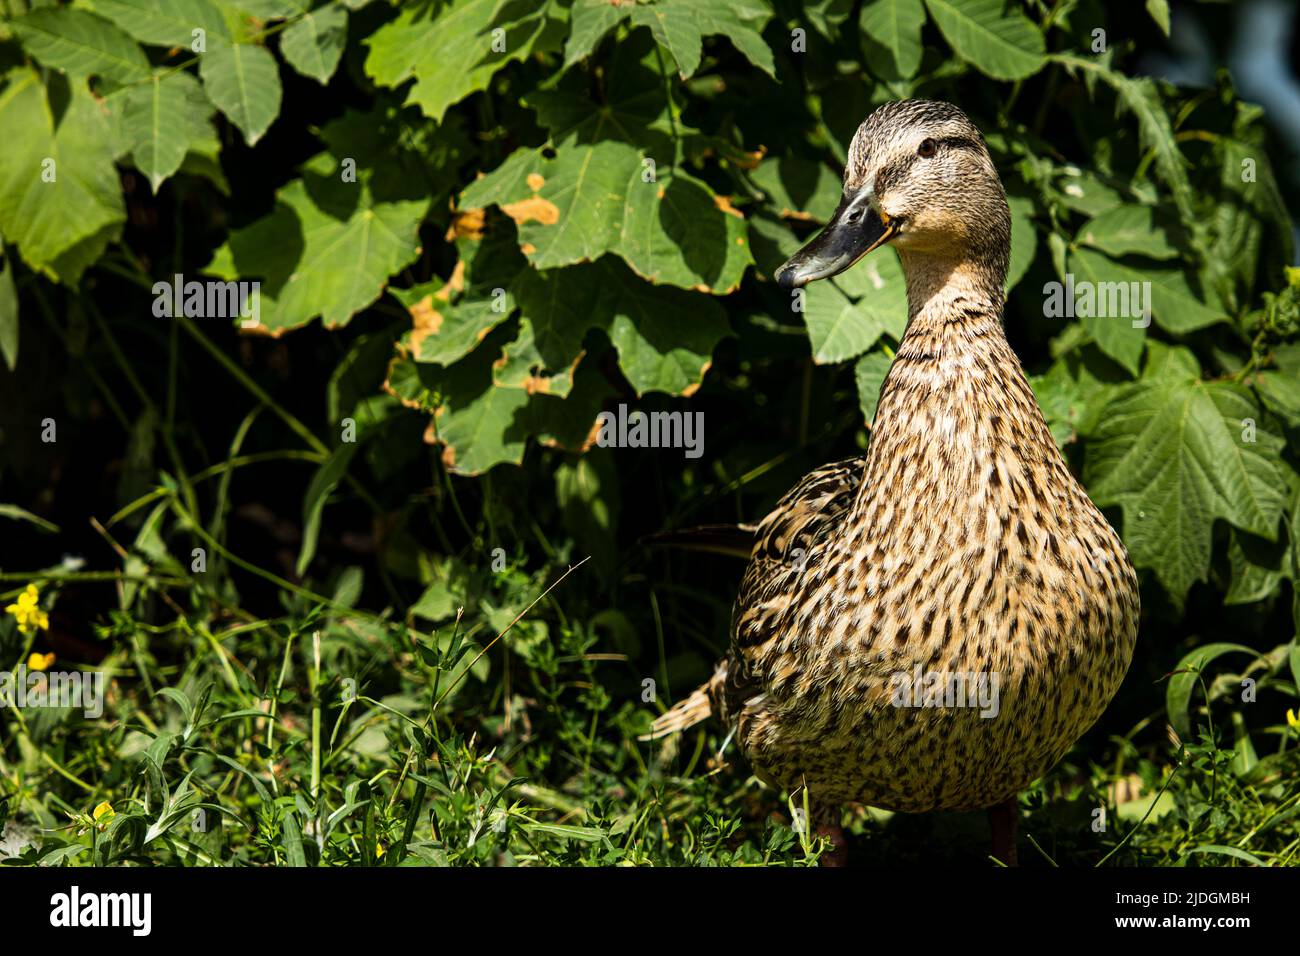 Portrait of a female mallard, standing upright in front of green leaves Stock Photo